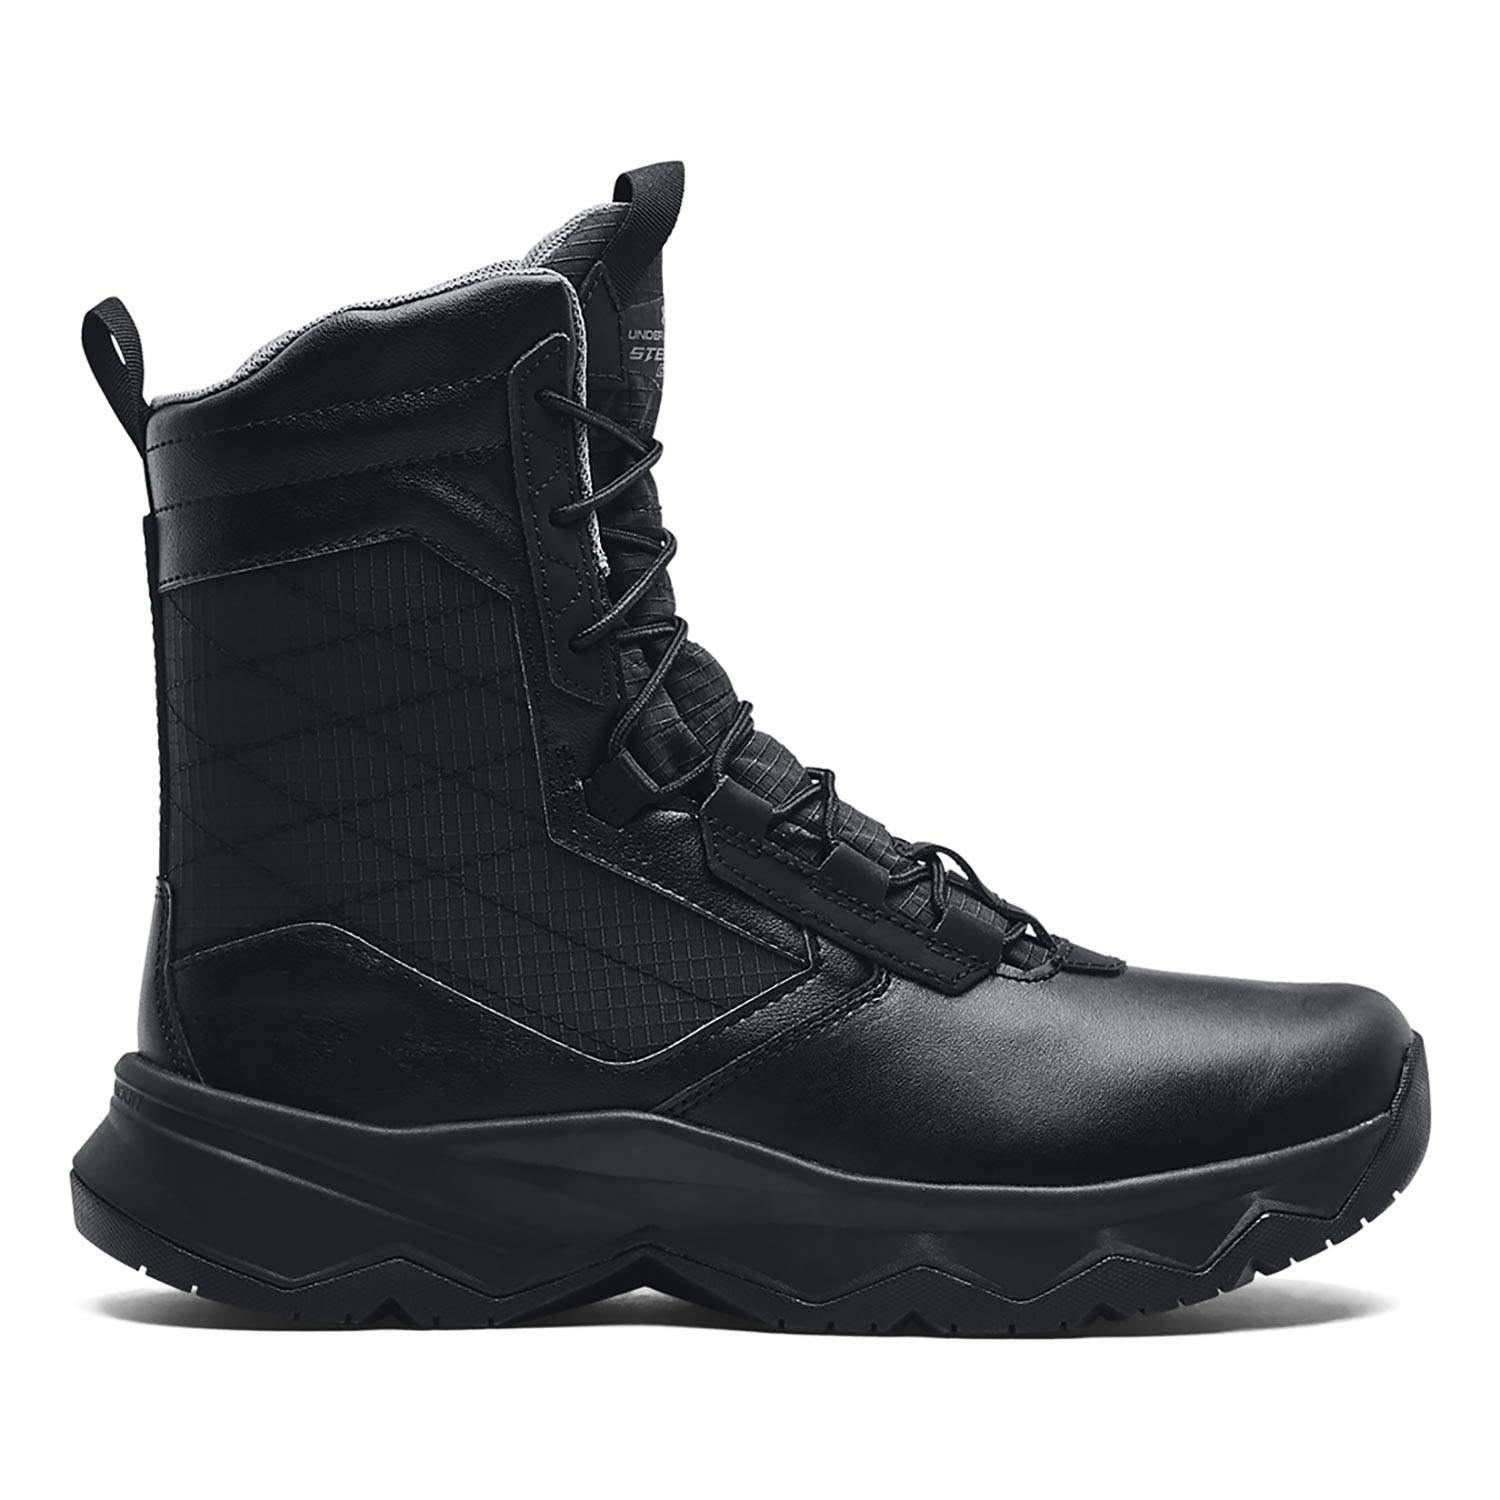 Stylish and Durable Under Armour Men's Tactical Boots